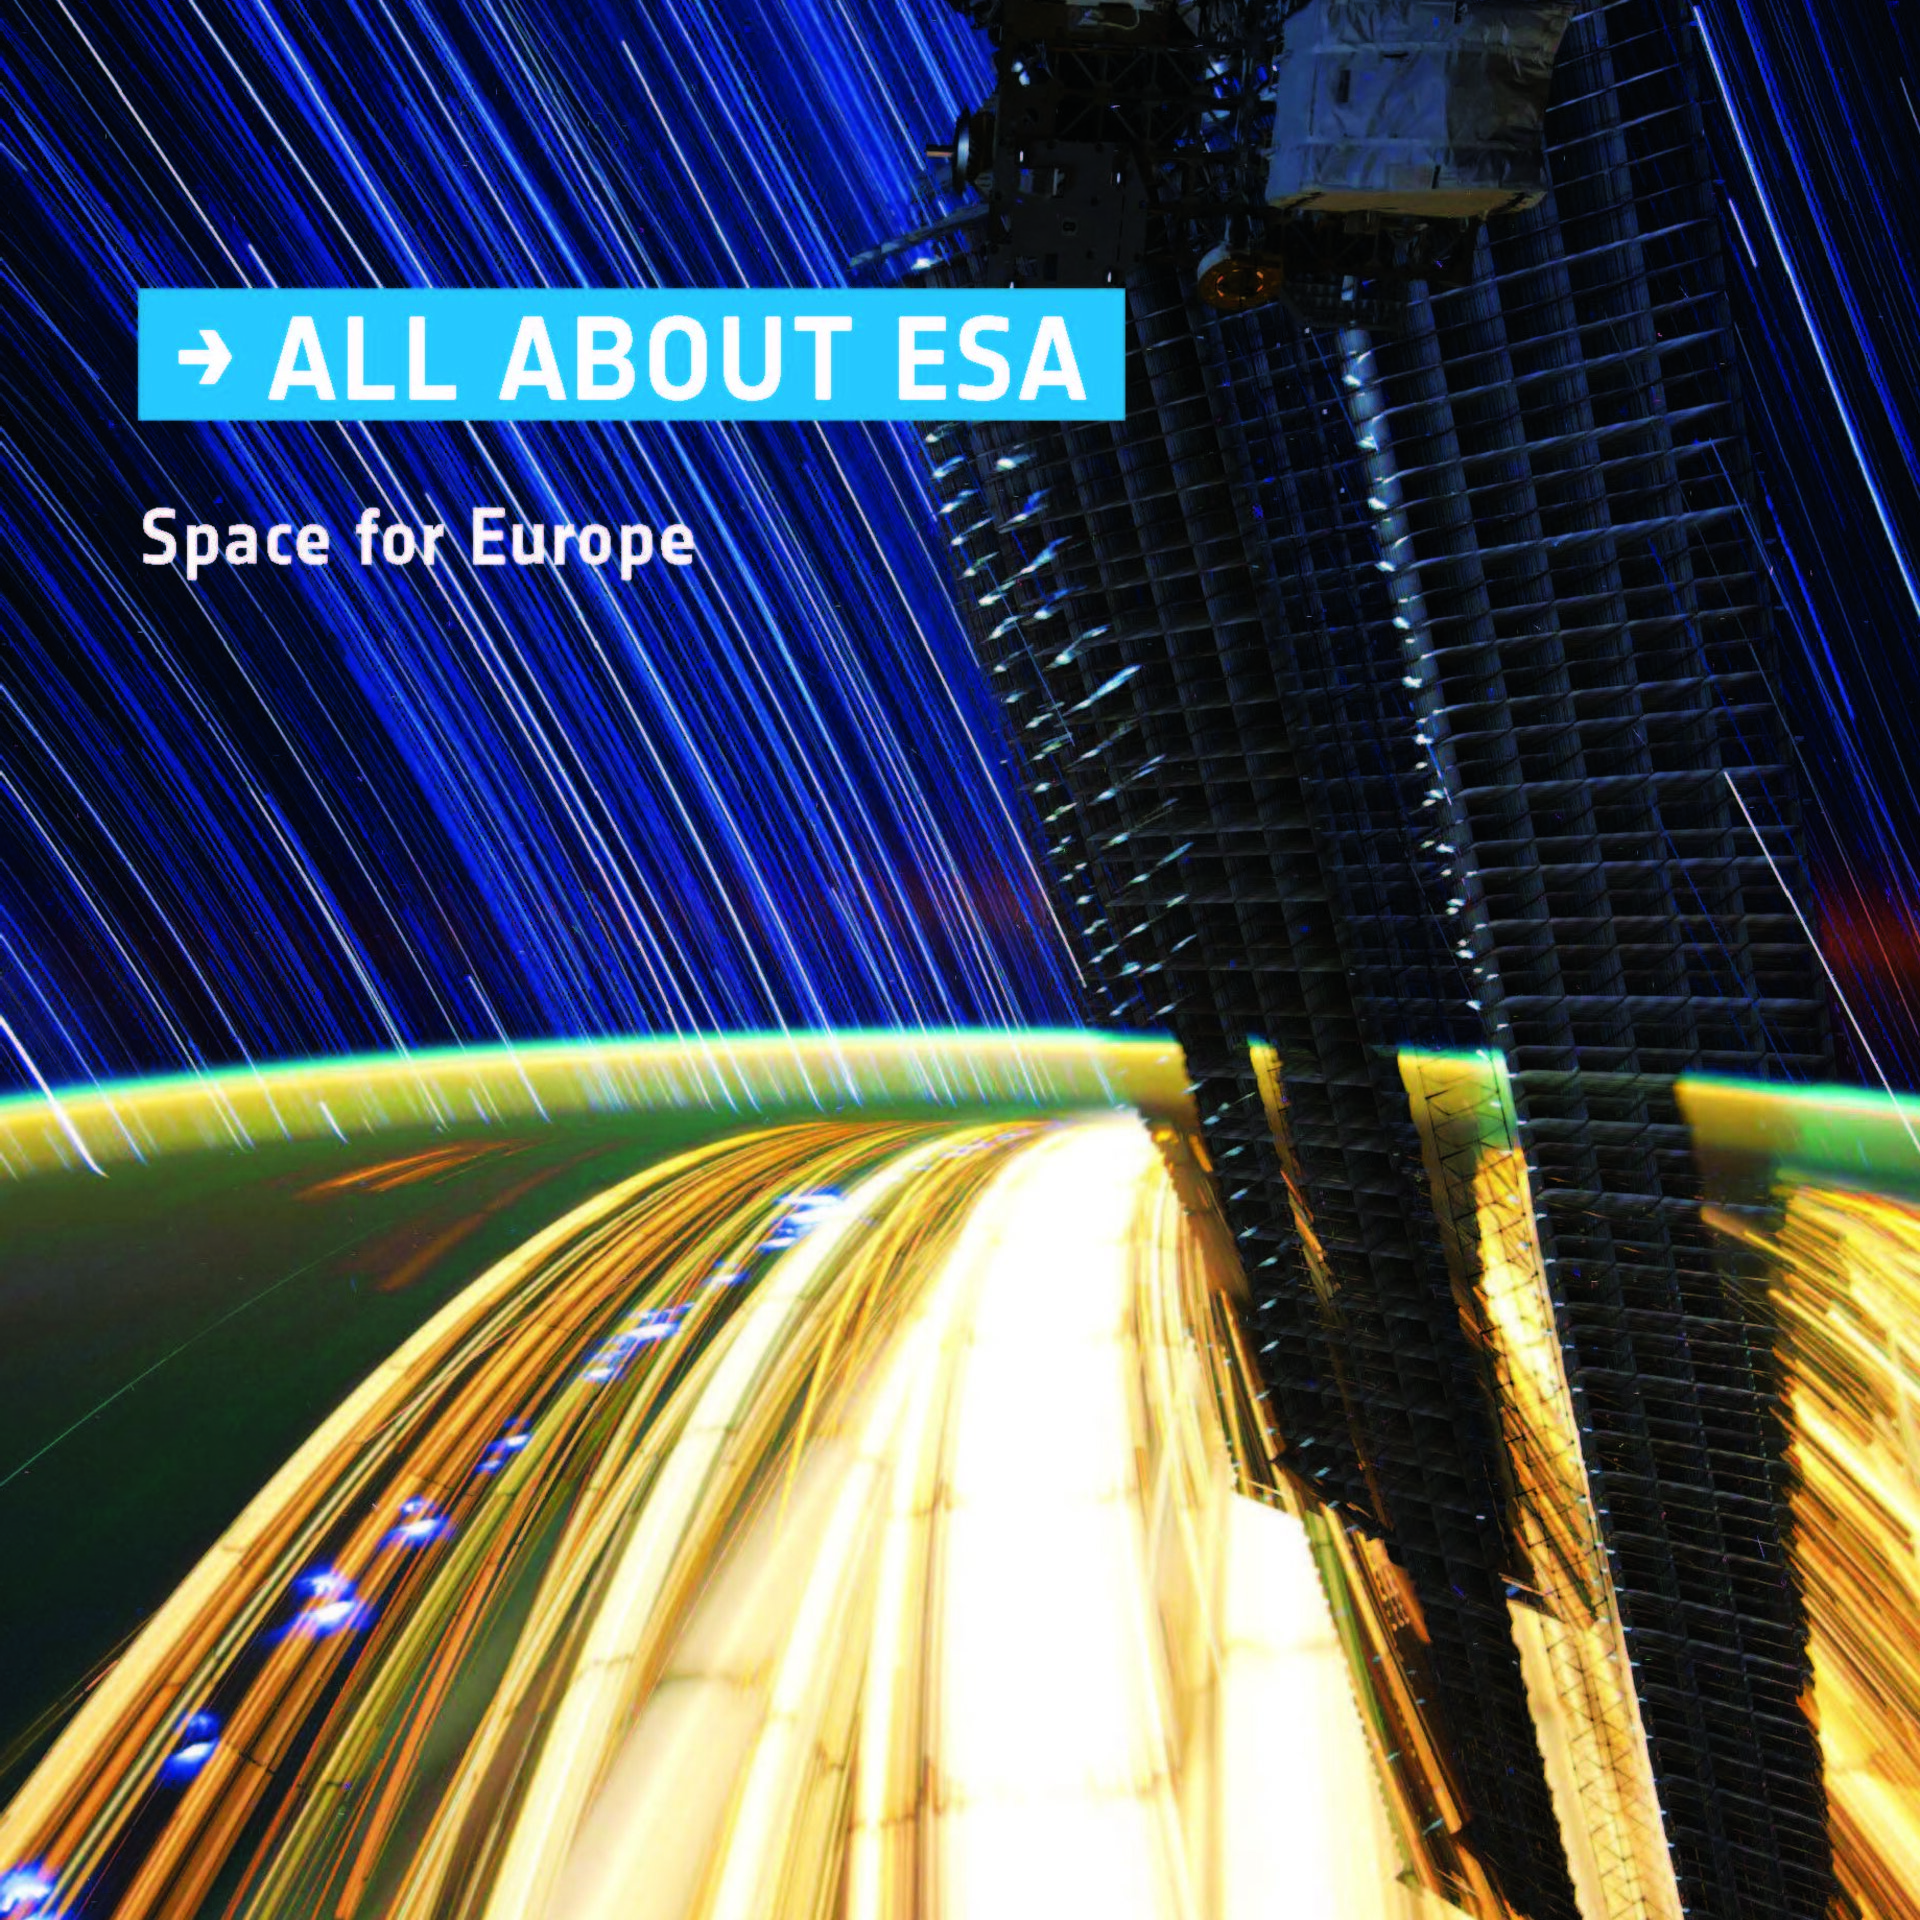 All about ESA